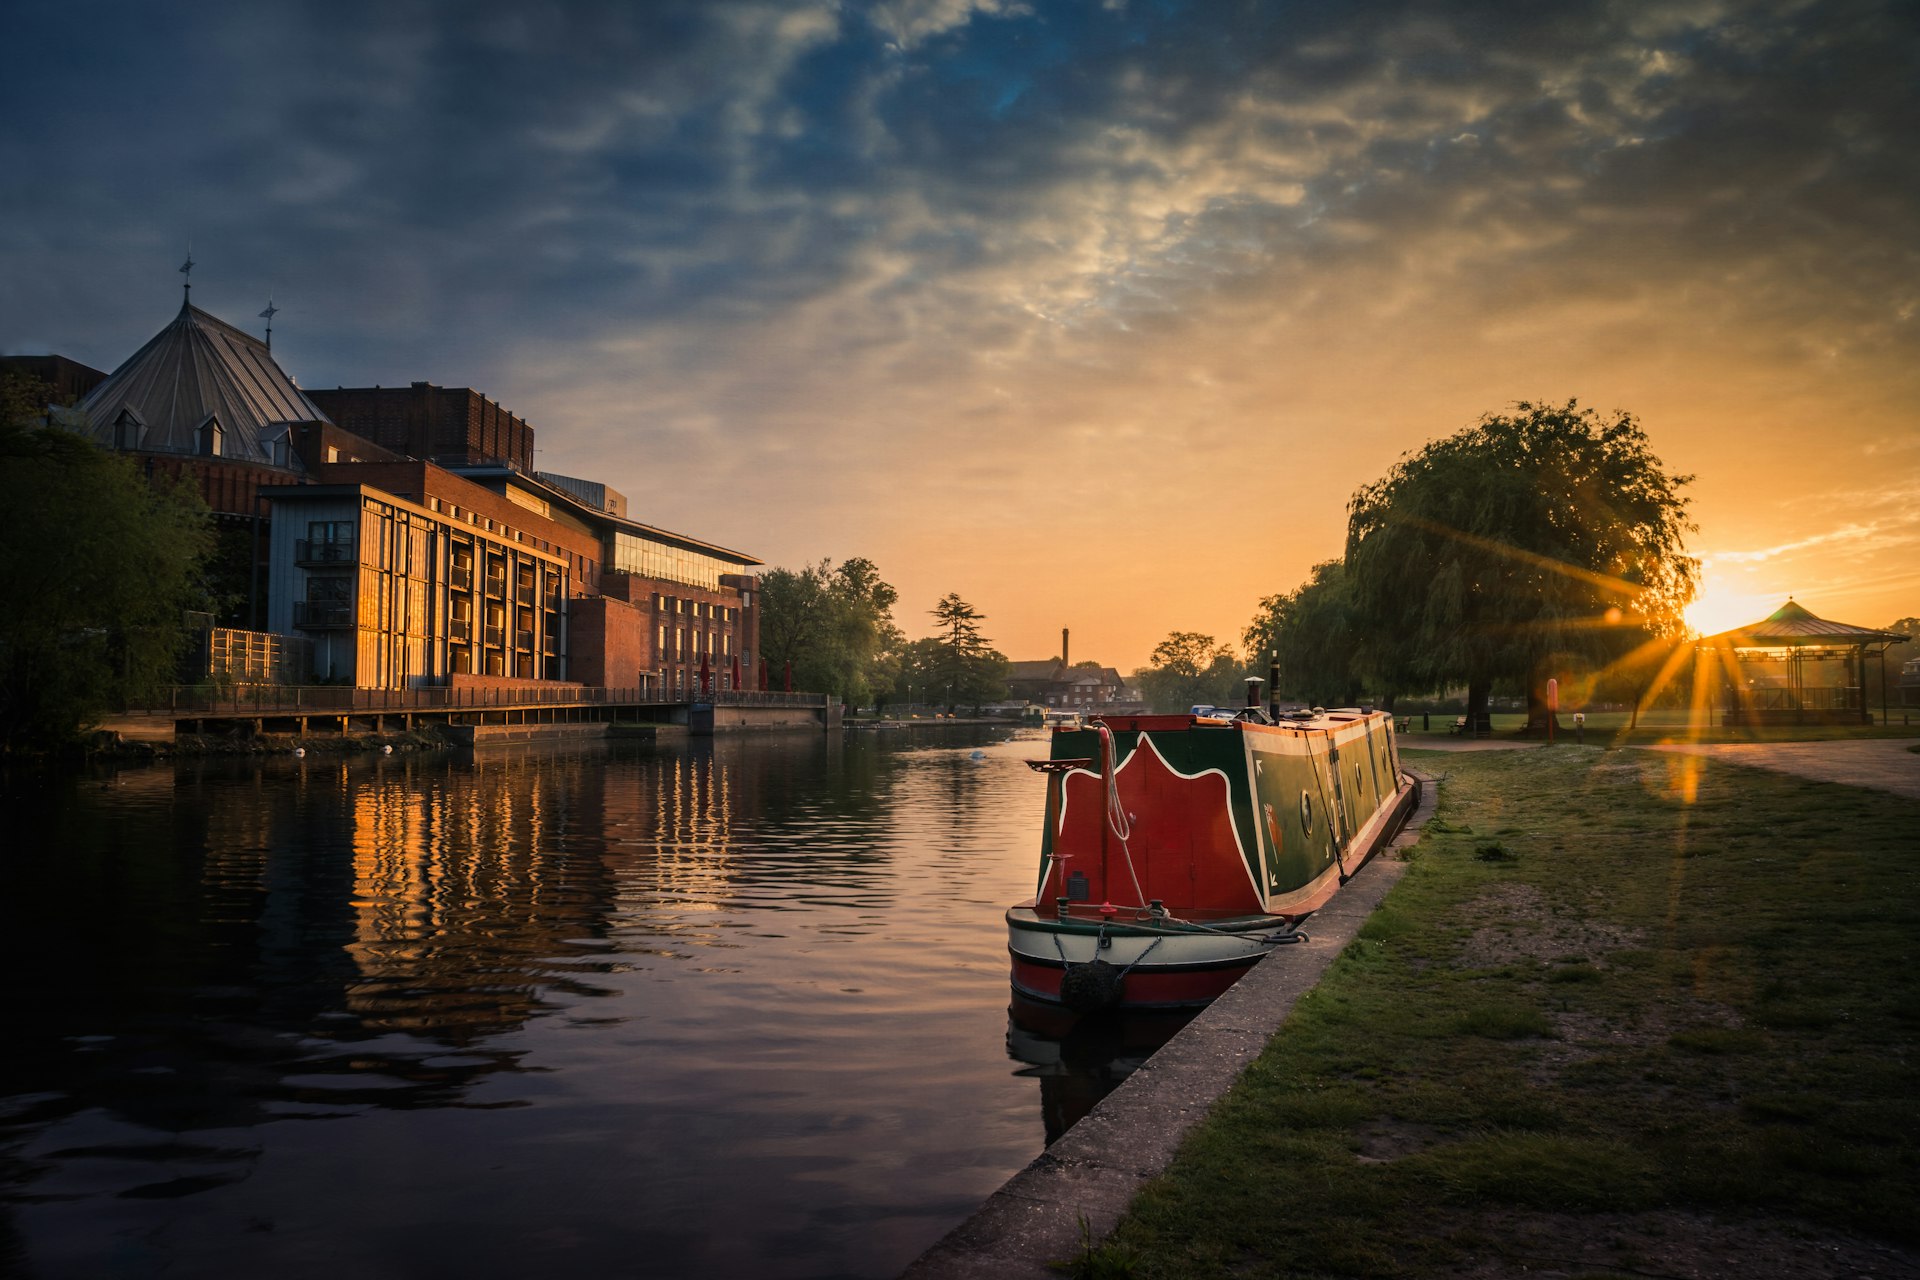 Narrow boat in on the Avon River at Stratford-upon-Avon during sunset